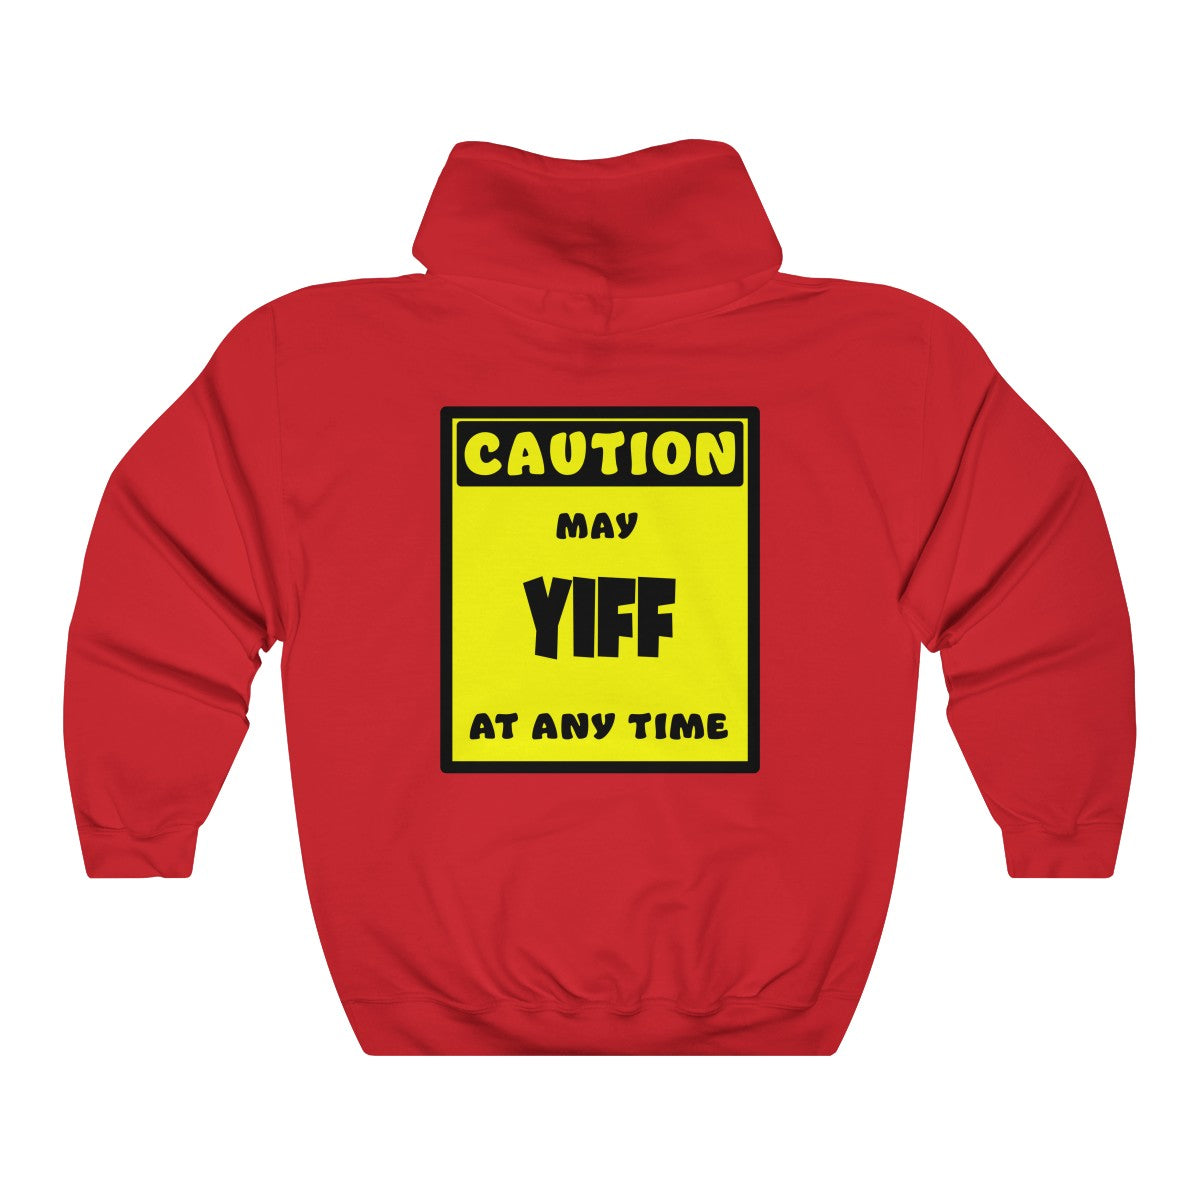 CAUTION! May YIFF at any time! - Hoodie Hoodie AFLT-Whootorca Red S 